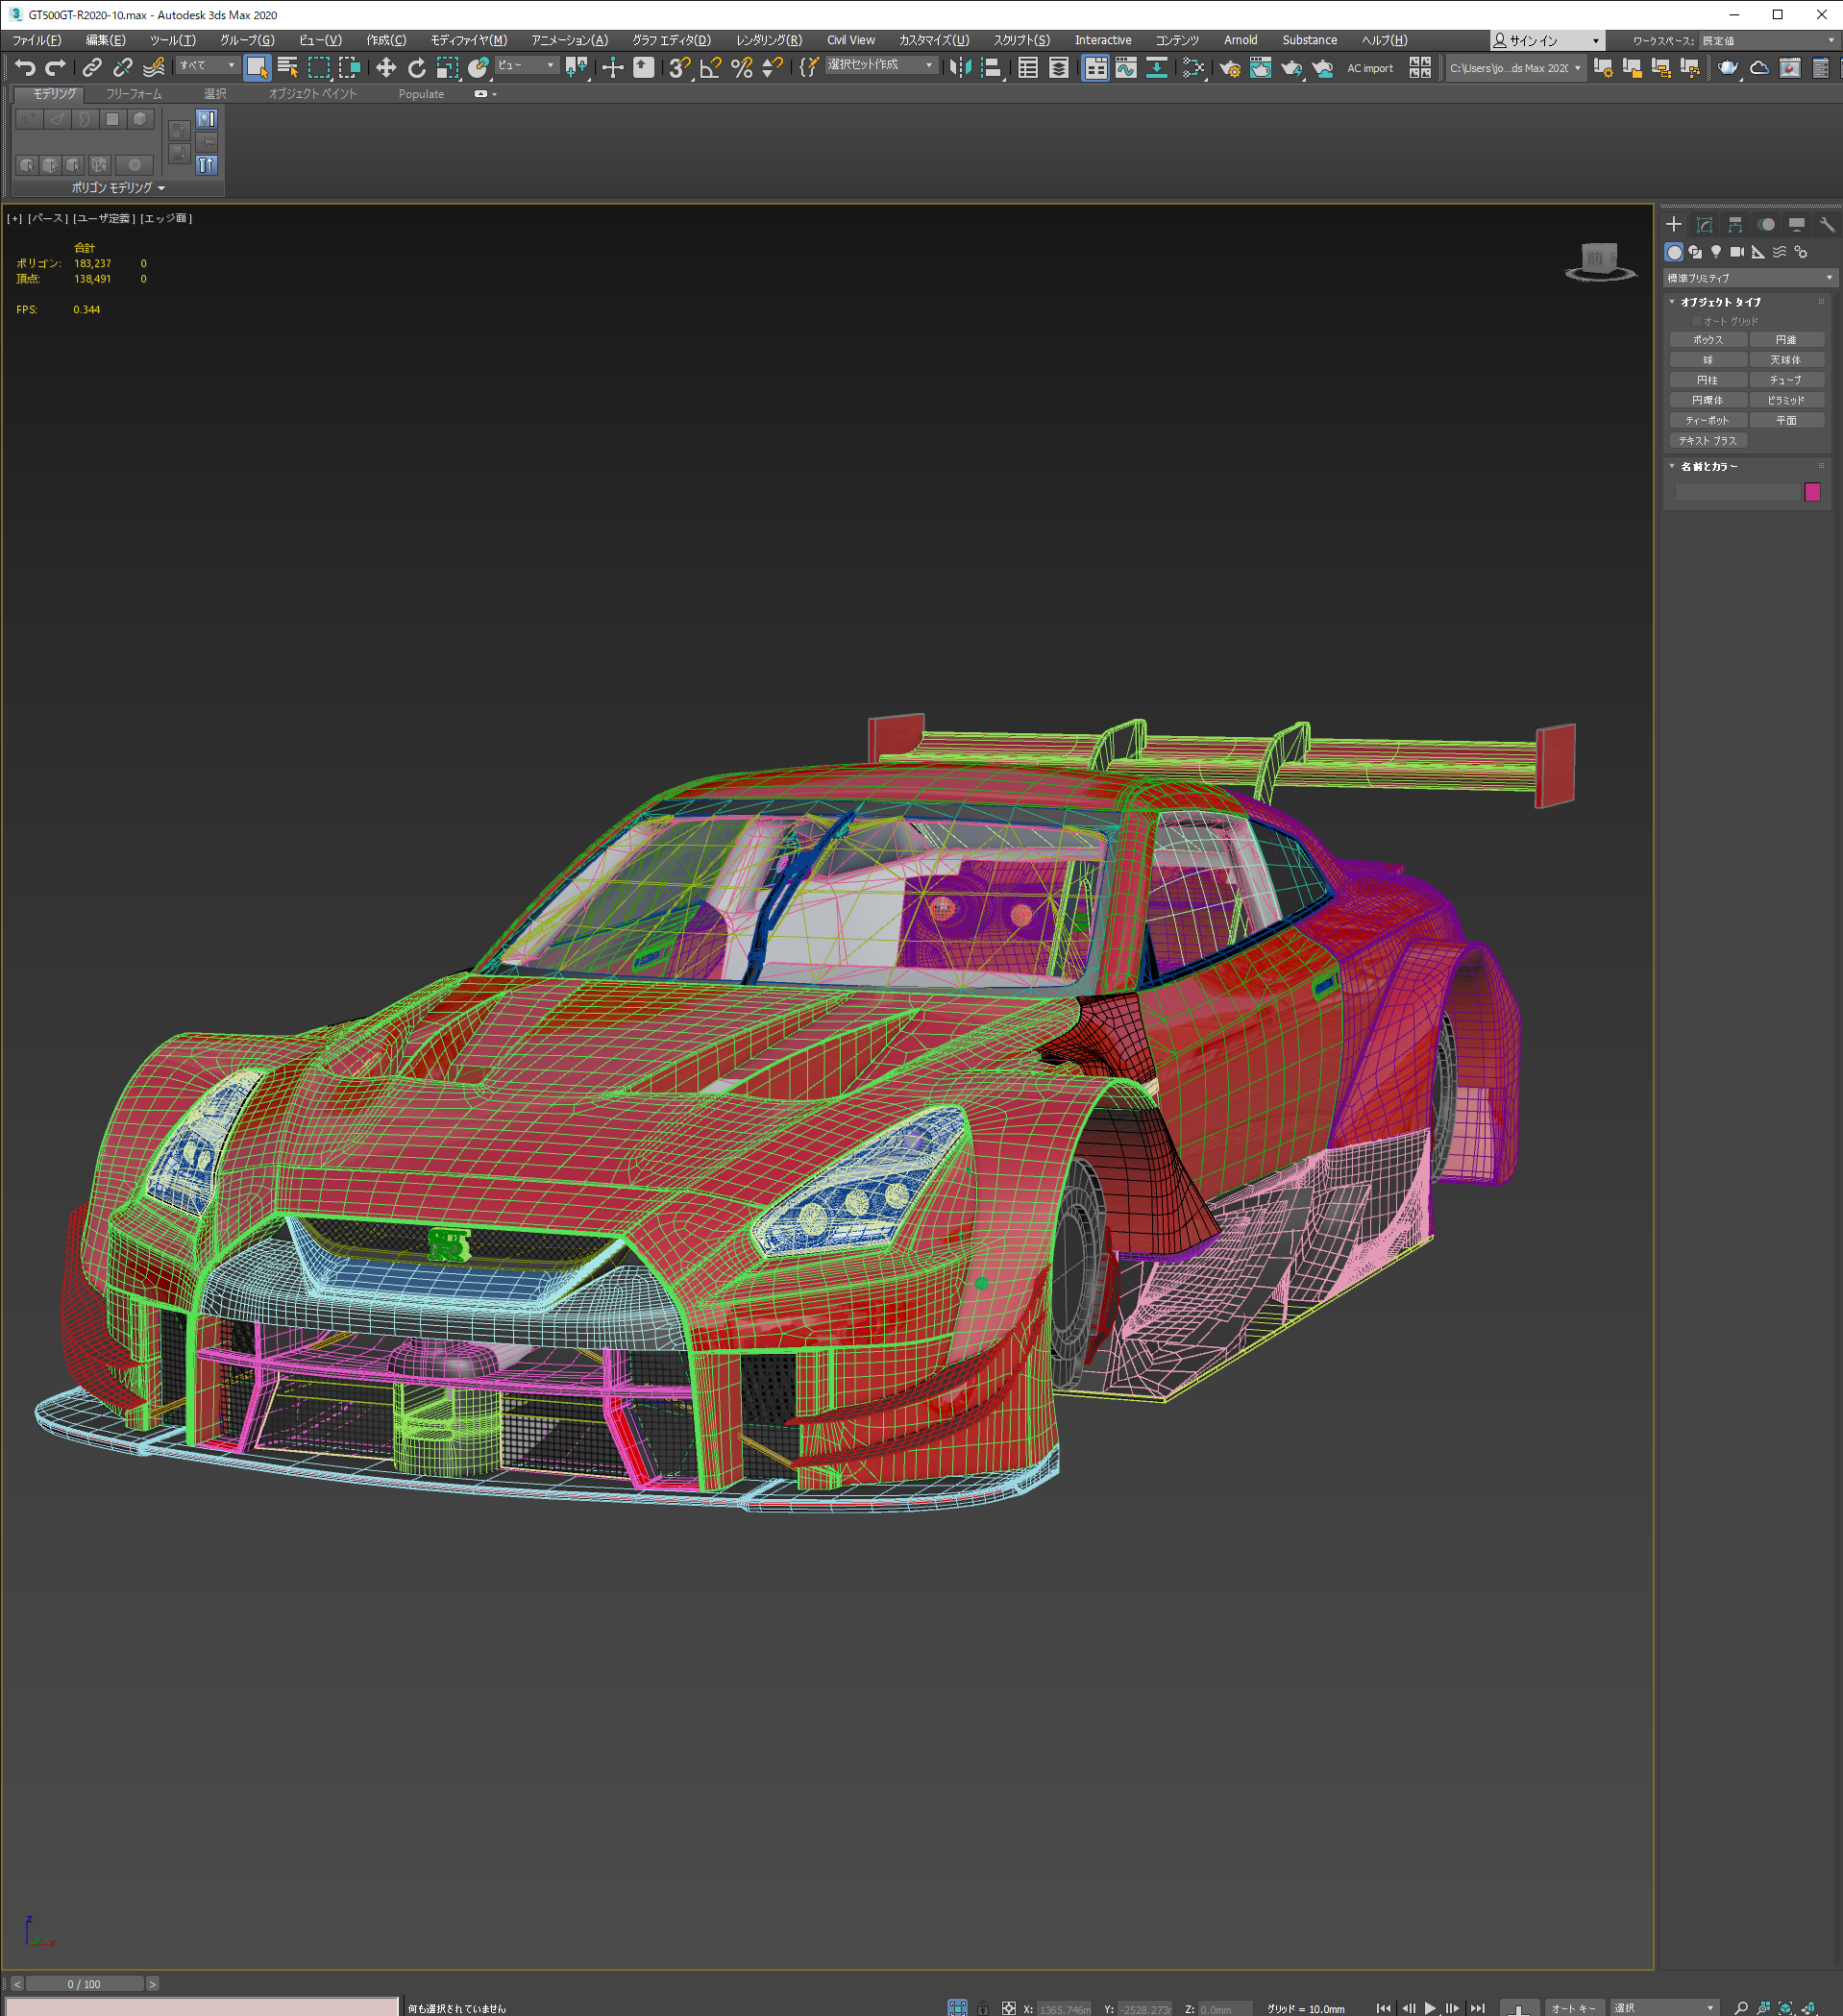 GT500GT-R2020-10.max - Autodesk 3ds Max 2020  2020_04_03 5_02_25.png